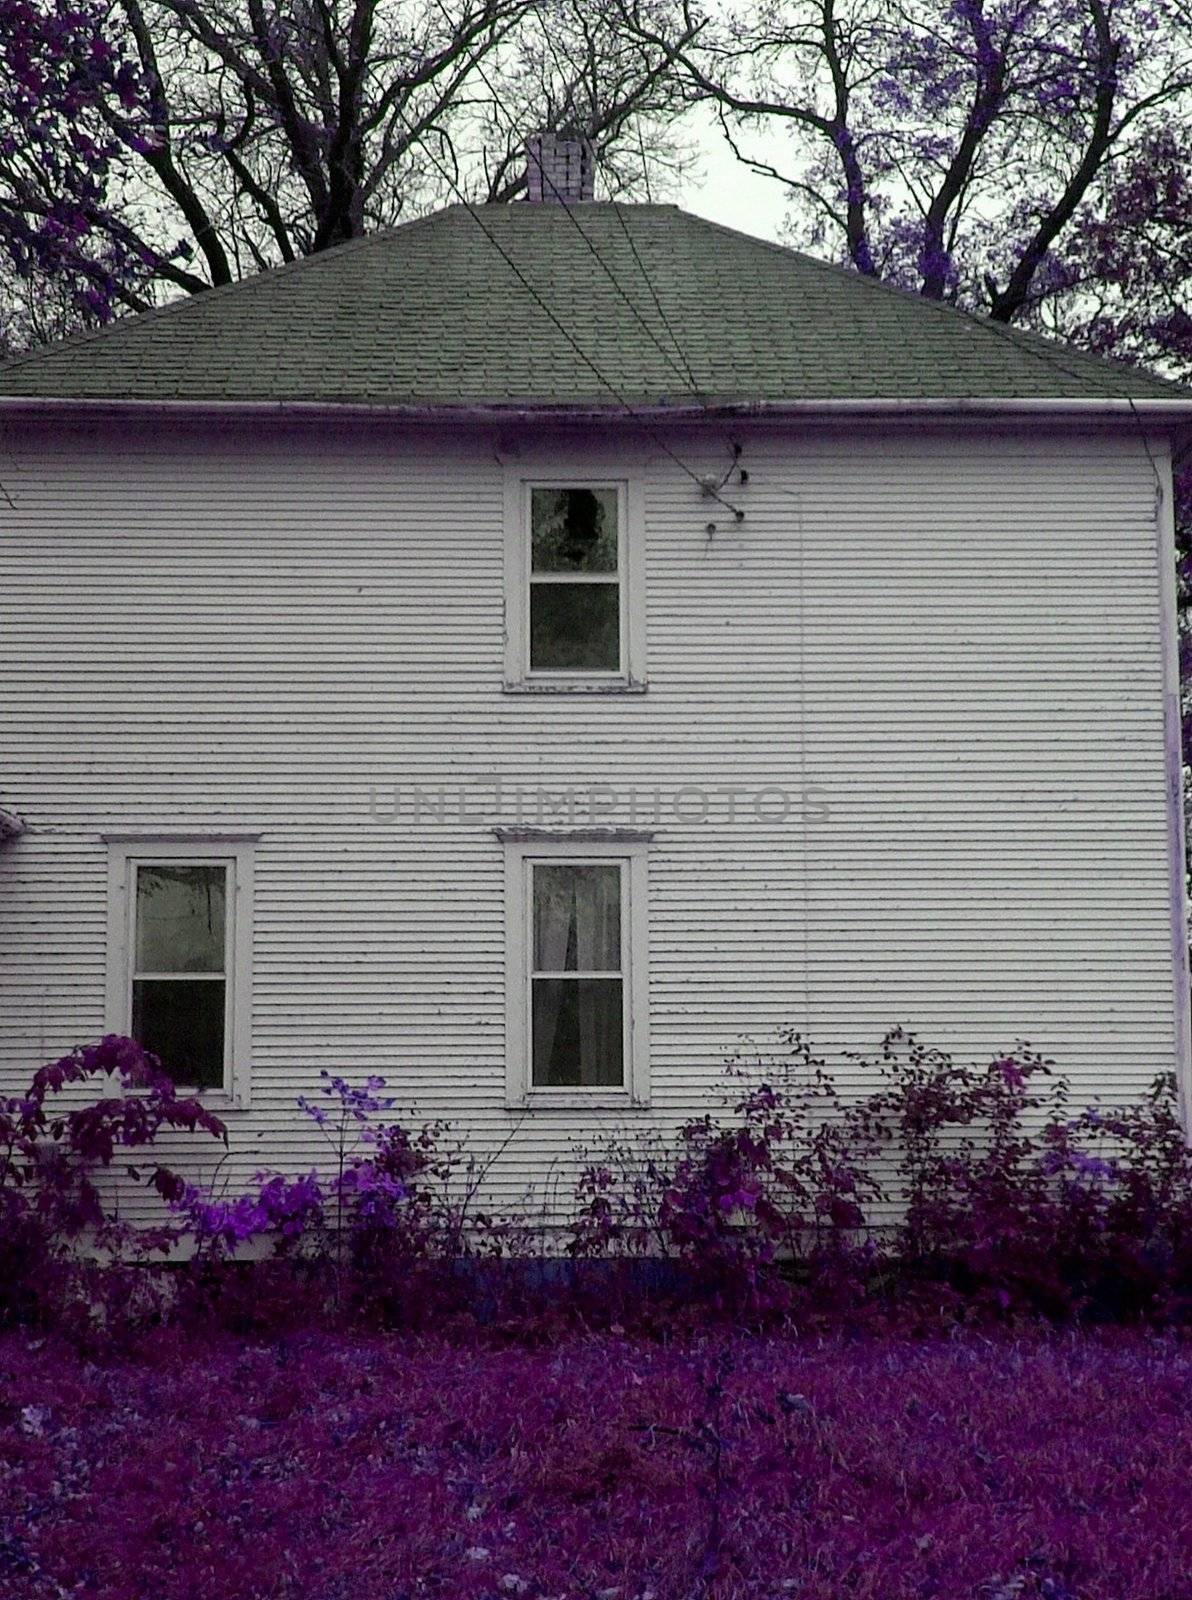 Farm house surrounded by purple flora and leafless trees.